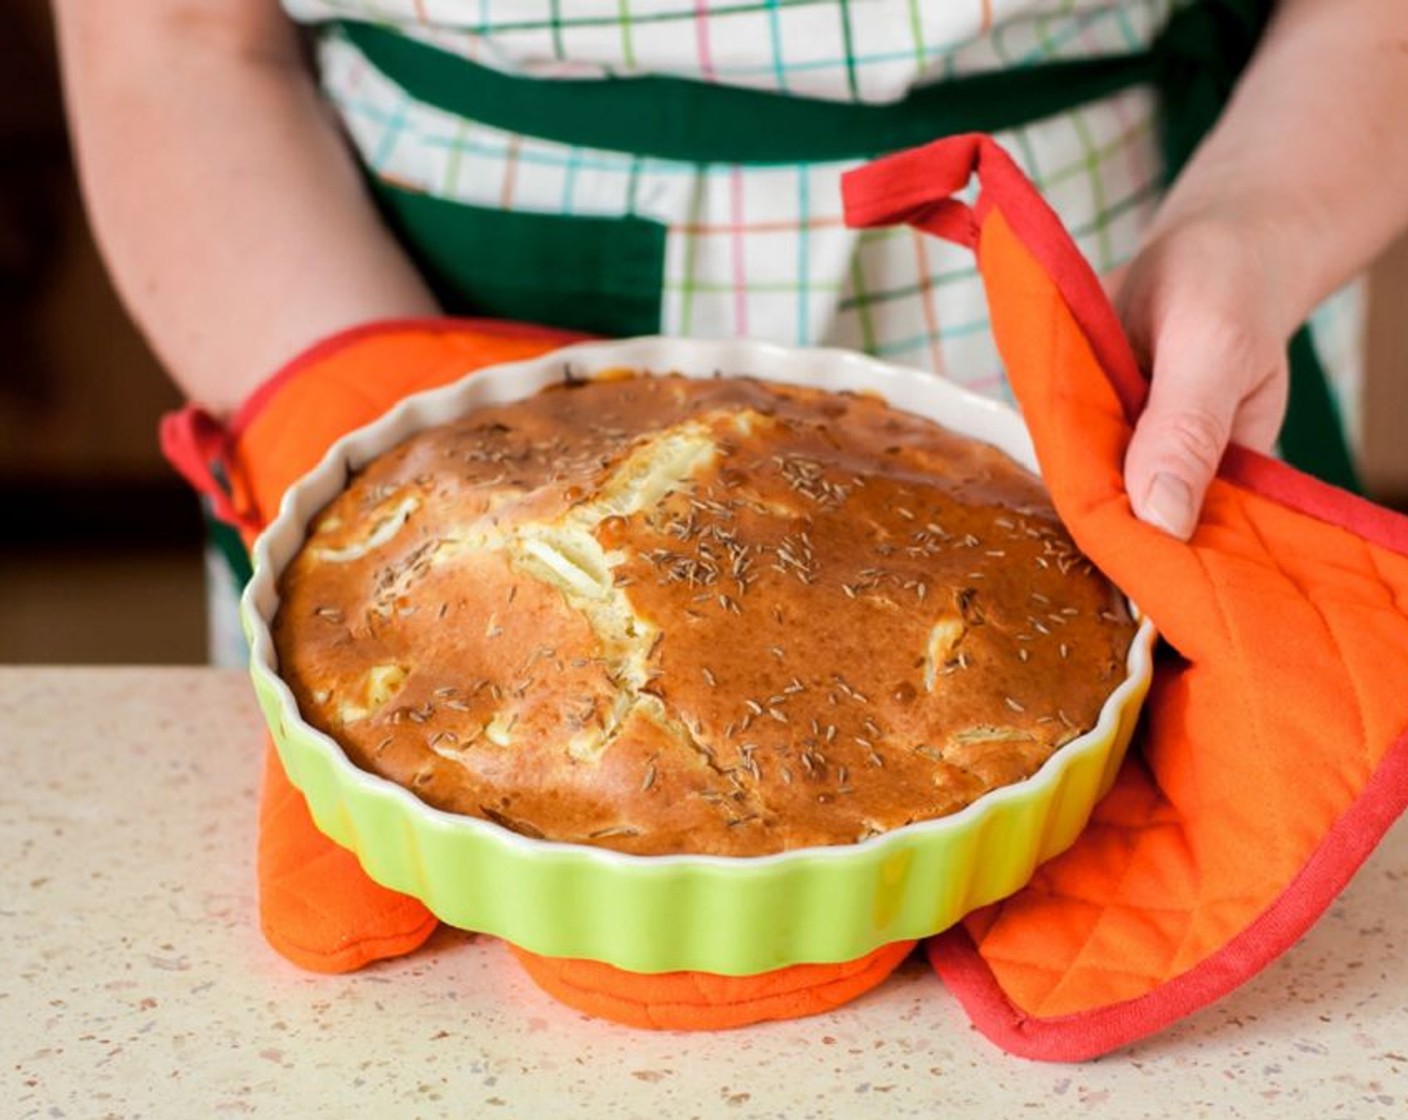 step 8 Bake this for 30-35 minutes, or until you have noticed that the batter is golden brown in color.